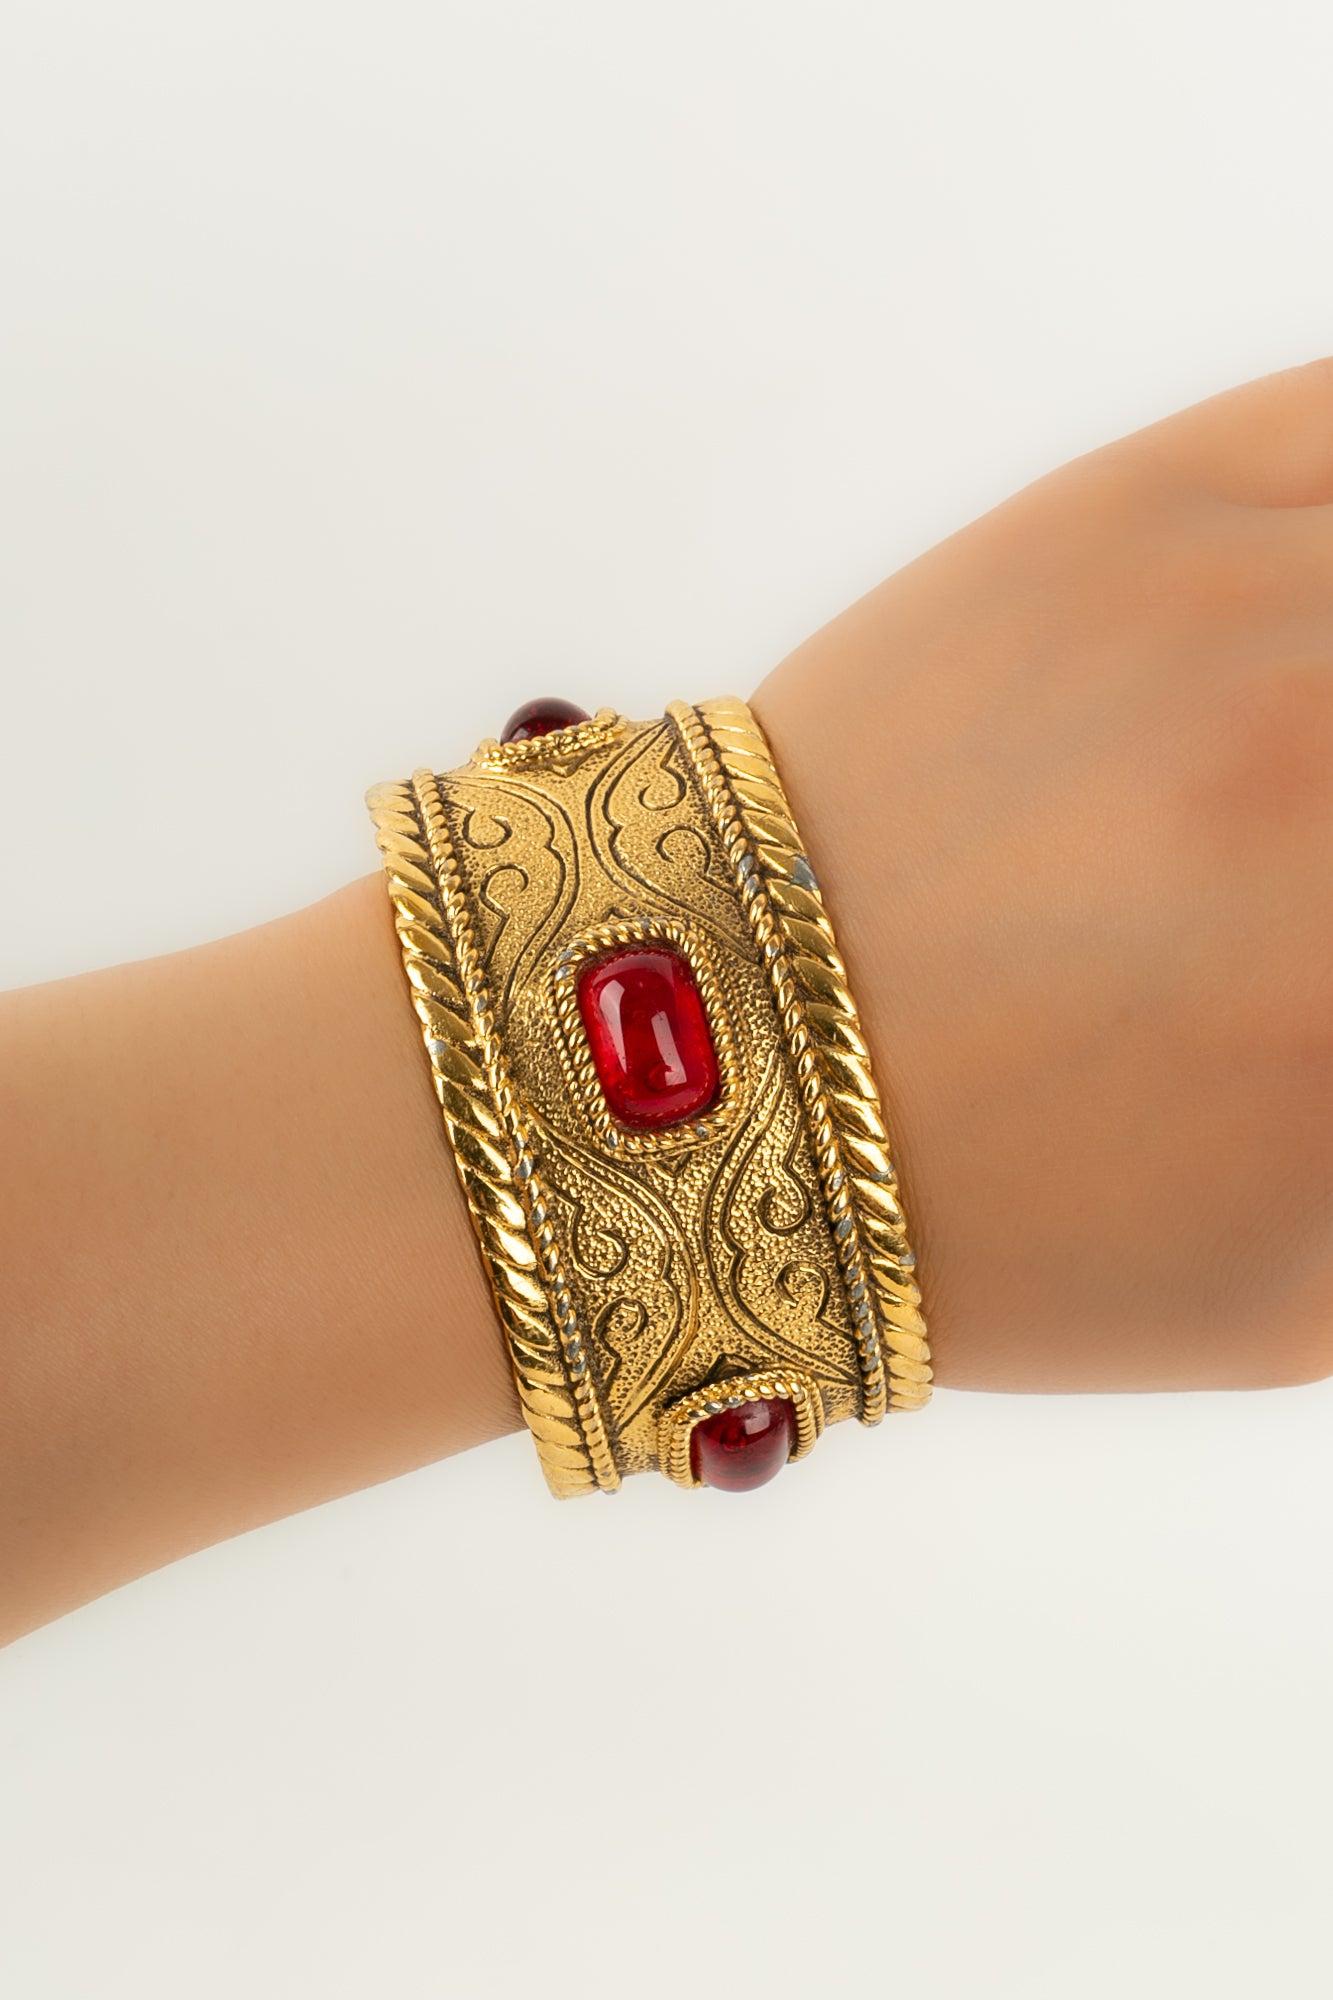 Chanel Bracelet in Golden Metal and Red Glass Paste, 1985 For Sale 4